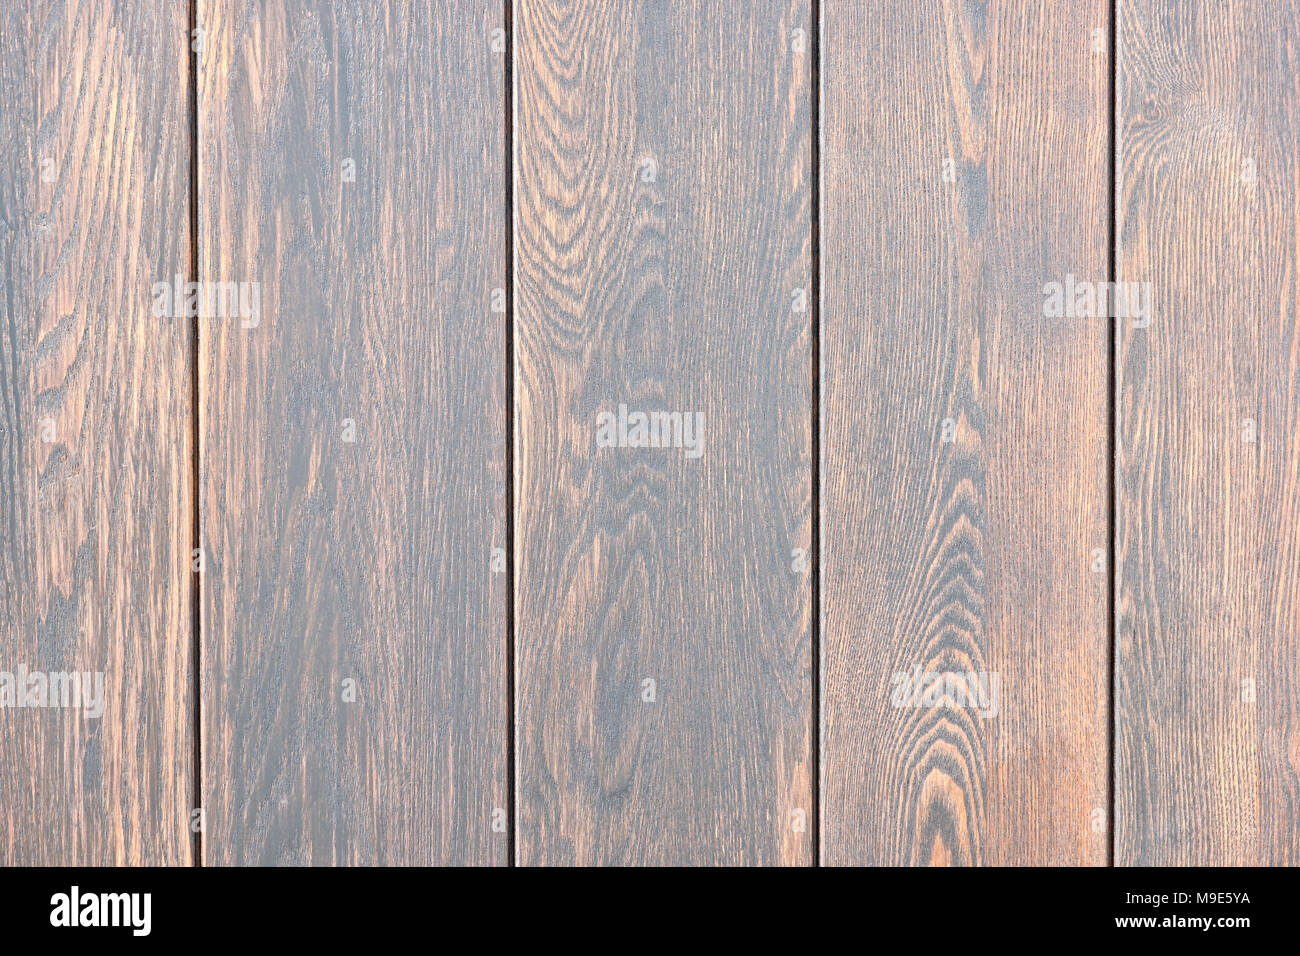 Five vertical wooden planks painted dark brown. Closeup view Stock Photo